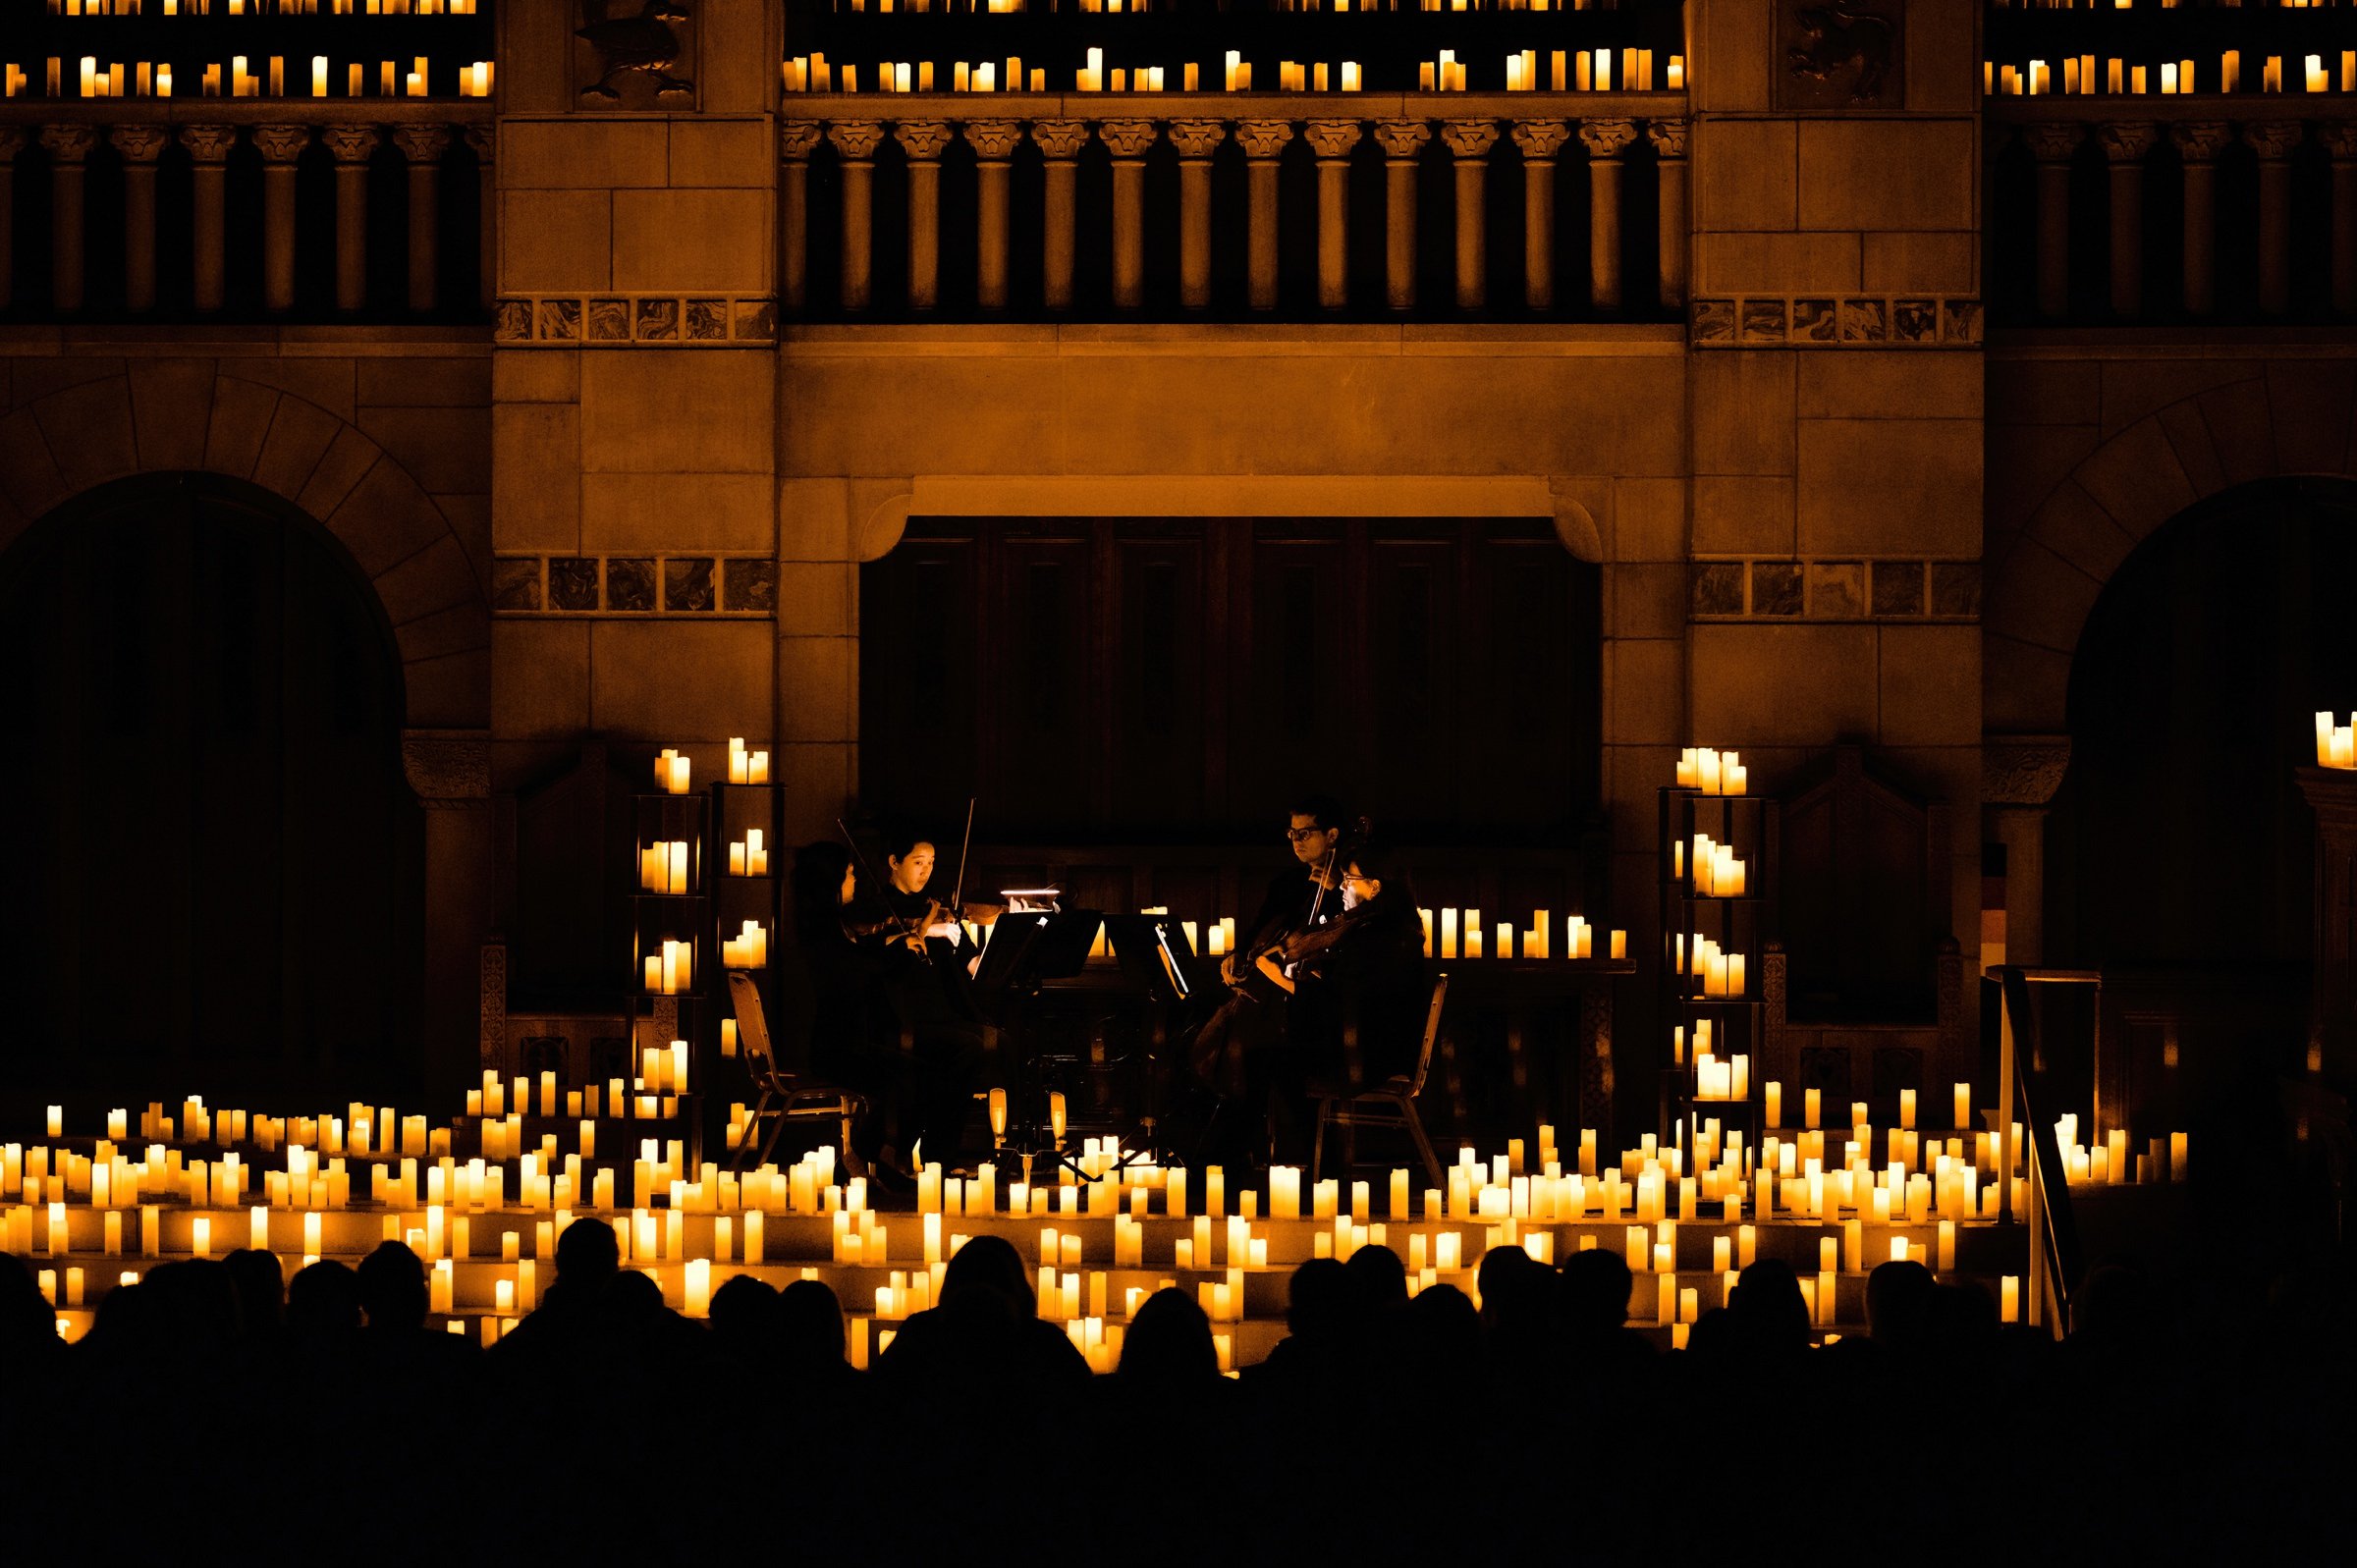 Grand Rapids Fountain Street Church Candlelight Concert Performance - Photographed for Fever by Ryan Inman - 22.jpg